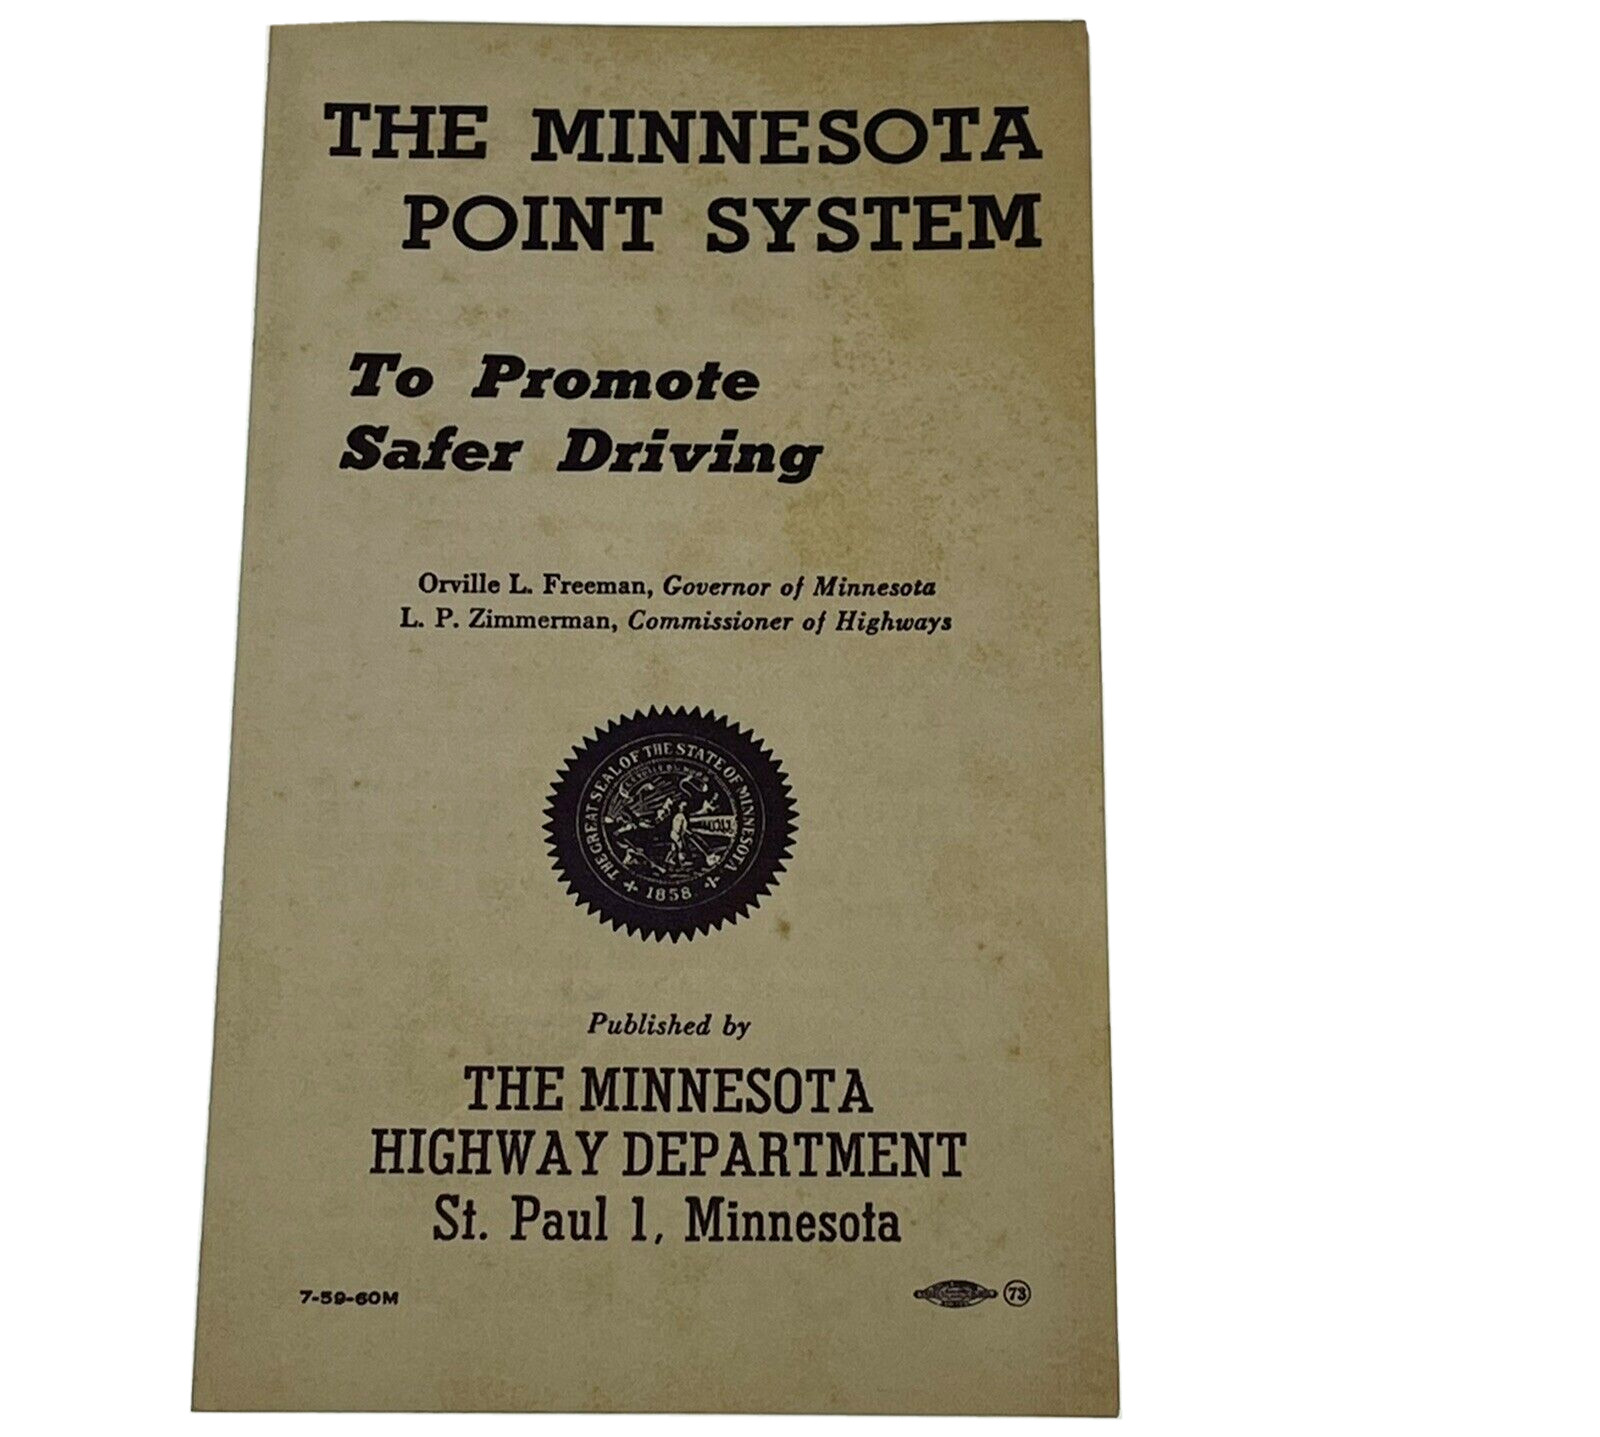 1959 The Minnesota Point System Highway Dept Driving Safety Information Booklet